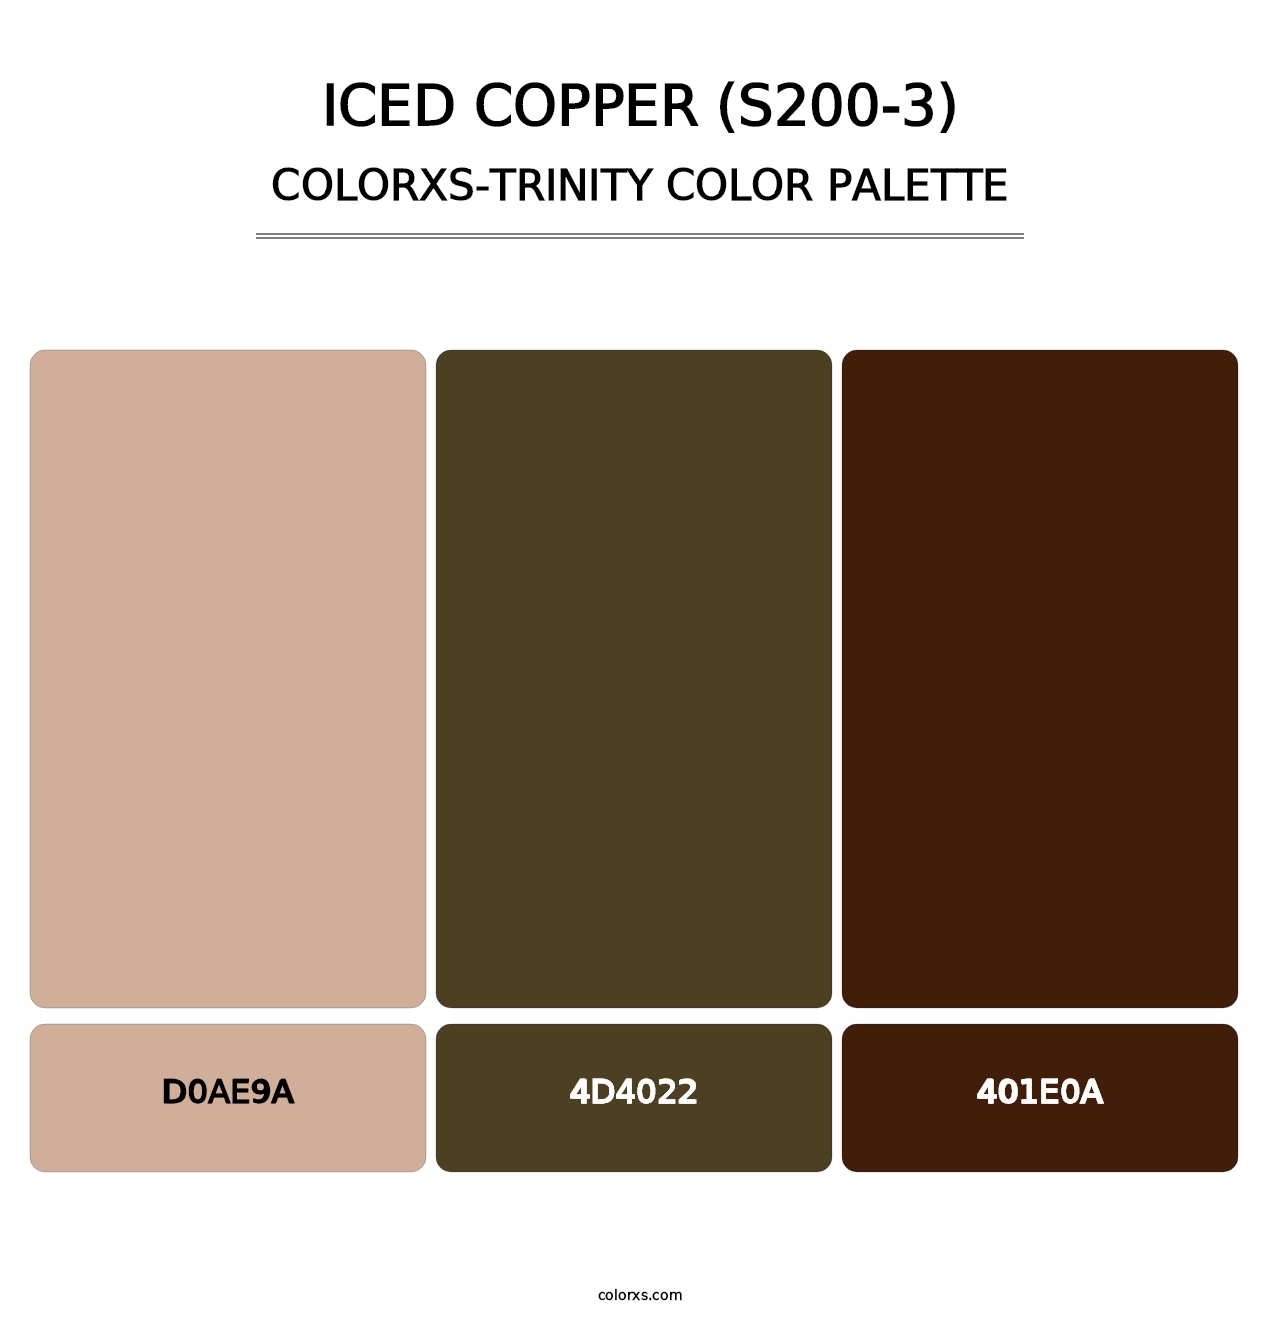 Iced Copper (S200-3) - Colorxs Trinity Palette